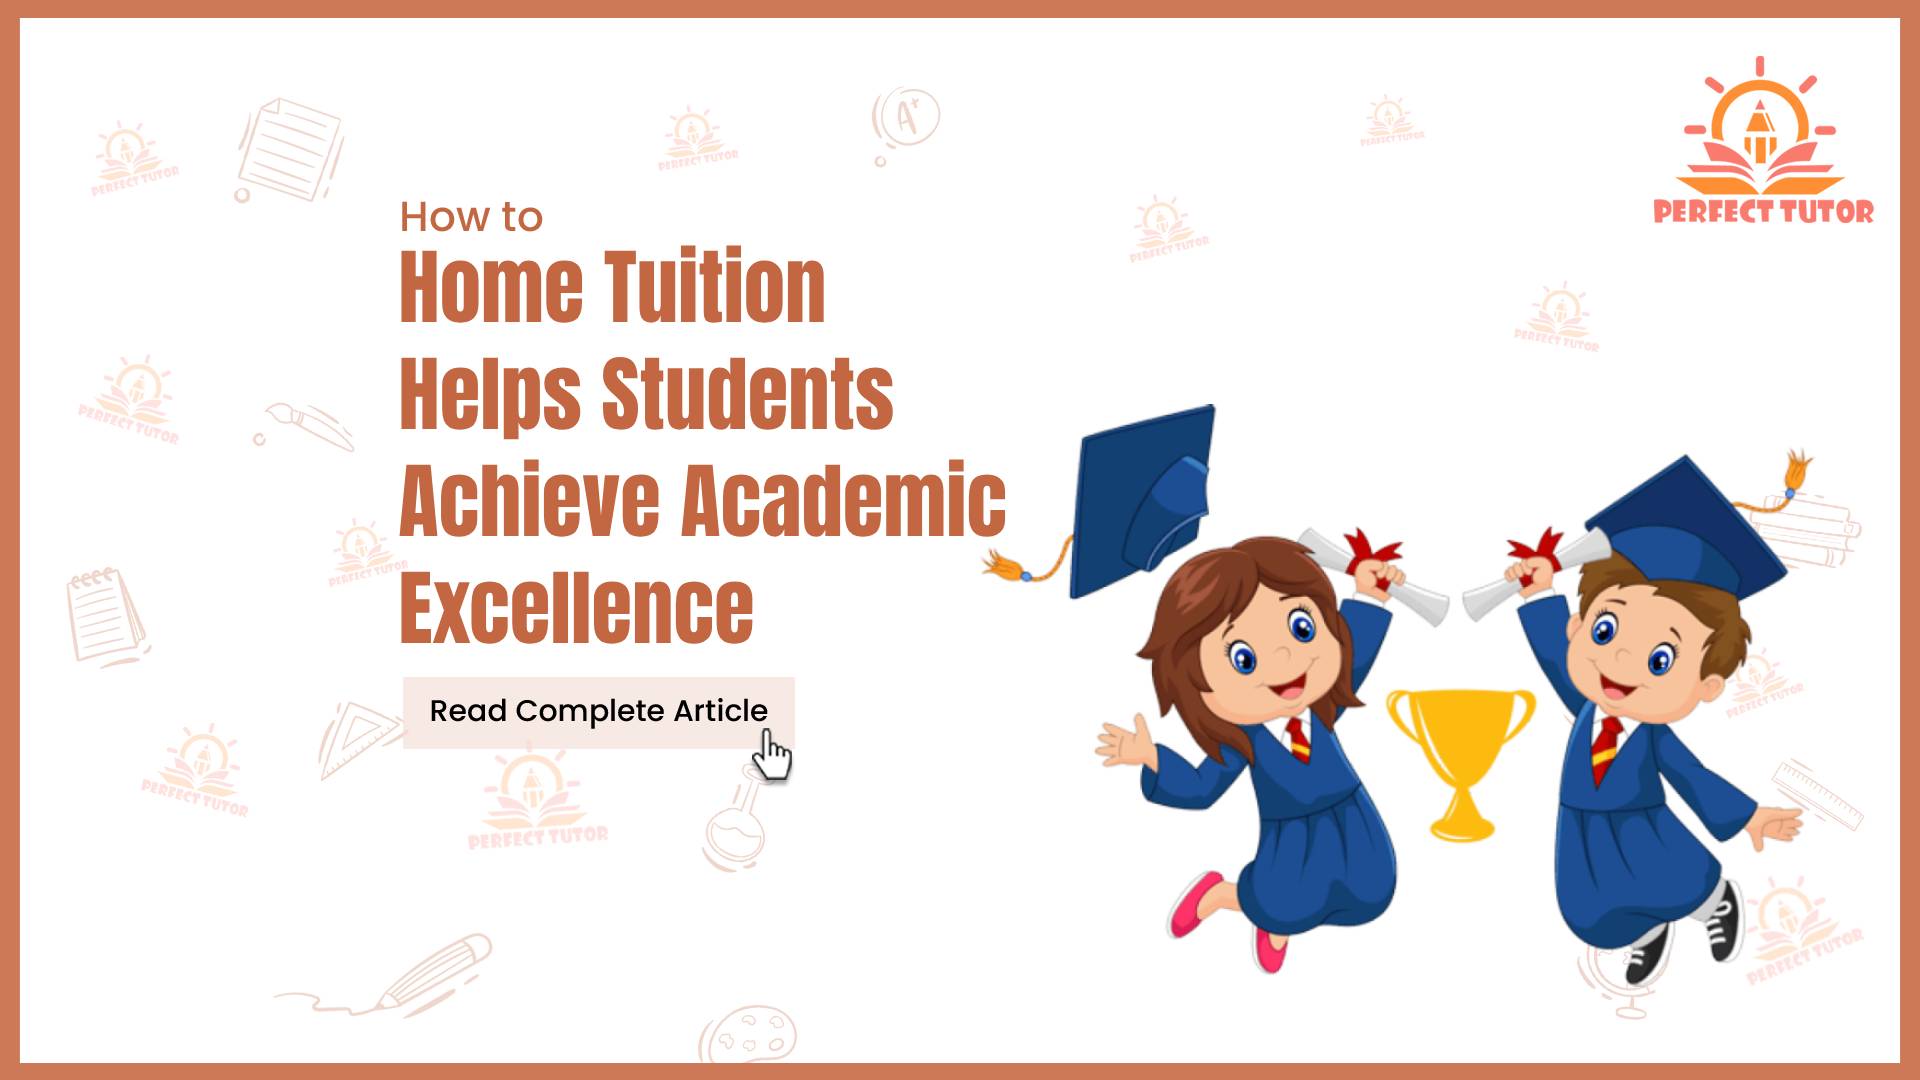 How Home Tuition Helps Students Achieve Academic Excellence